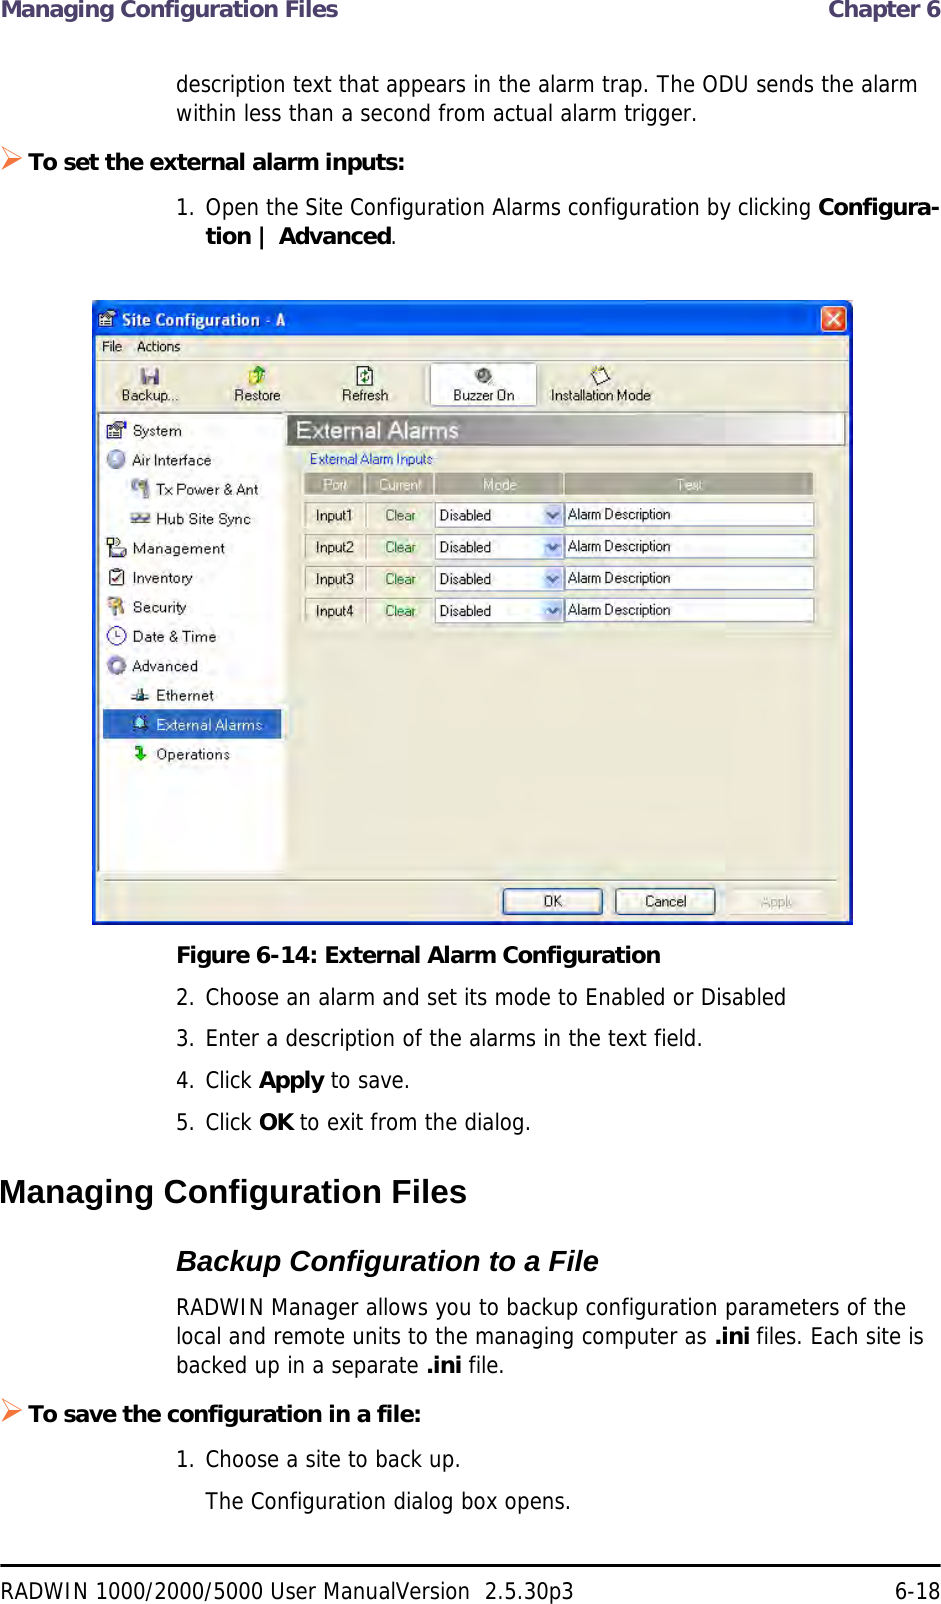 Managing Configuration Files  Chapter 6RADWIN 1000/2000/5000 User ManualVersion  2.5.30p3 6-18description text that appears in the alarm trap. The ODU sends the alarm within less than a second from actual alarm trigger.To set the external alarm inputs:1. Open the Site Configuration Alarms configuration by clicking Configura-tion | Advanced.Figure 6-14: External Alarm Configuration2. Choose an alarm and set its mode to Enabled or Disabled3. Enter a description of the alarms in the text field.4. Click Apply to save.5. Click OK to exit from the dialog.Managing Configuration FilesBackup Configuration to a FileRADWIN Manager allows you to backup configuration parameters of the local and remote units to the managing computer as .ini files. Each site is backed up in a separate .ini file.To save the configuration in a file:1. Choose a site to back up.The Configuration dialog box opens.